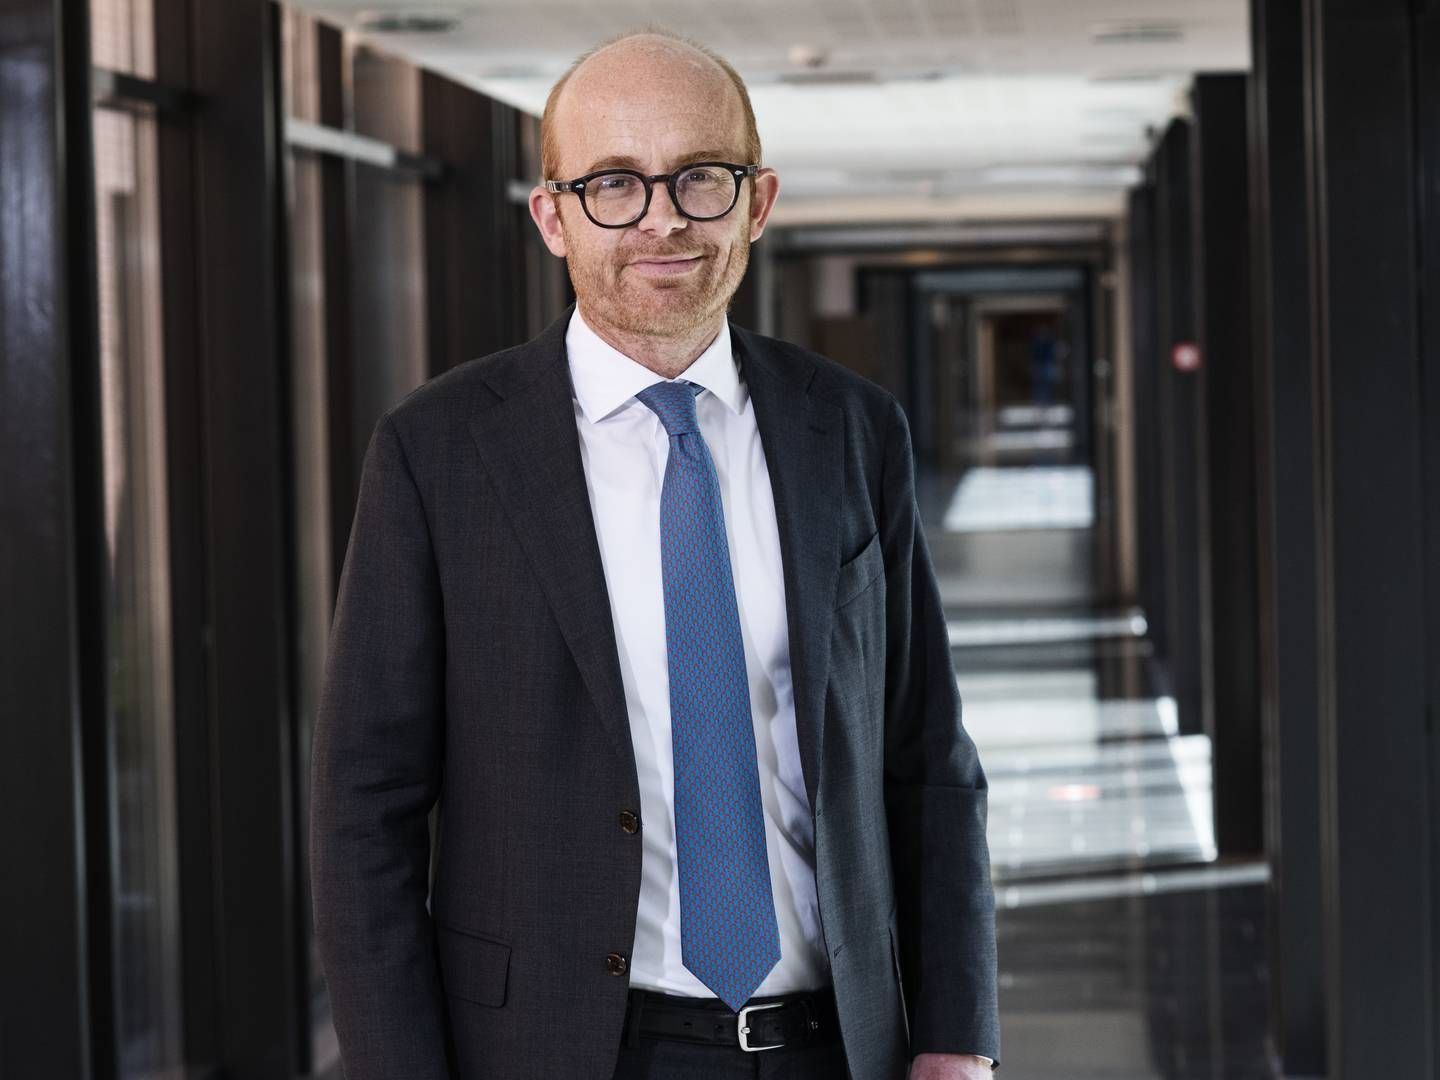 Martin Præstegaard became the CEO at ATP earlier this year. The Q3 report is his second report as head of the Danish state labor market fund. | Photo: Gregers Tycho/ERH